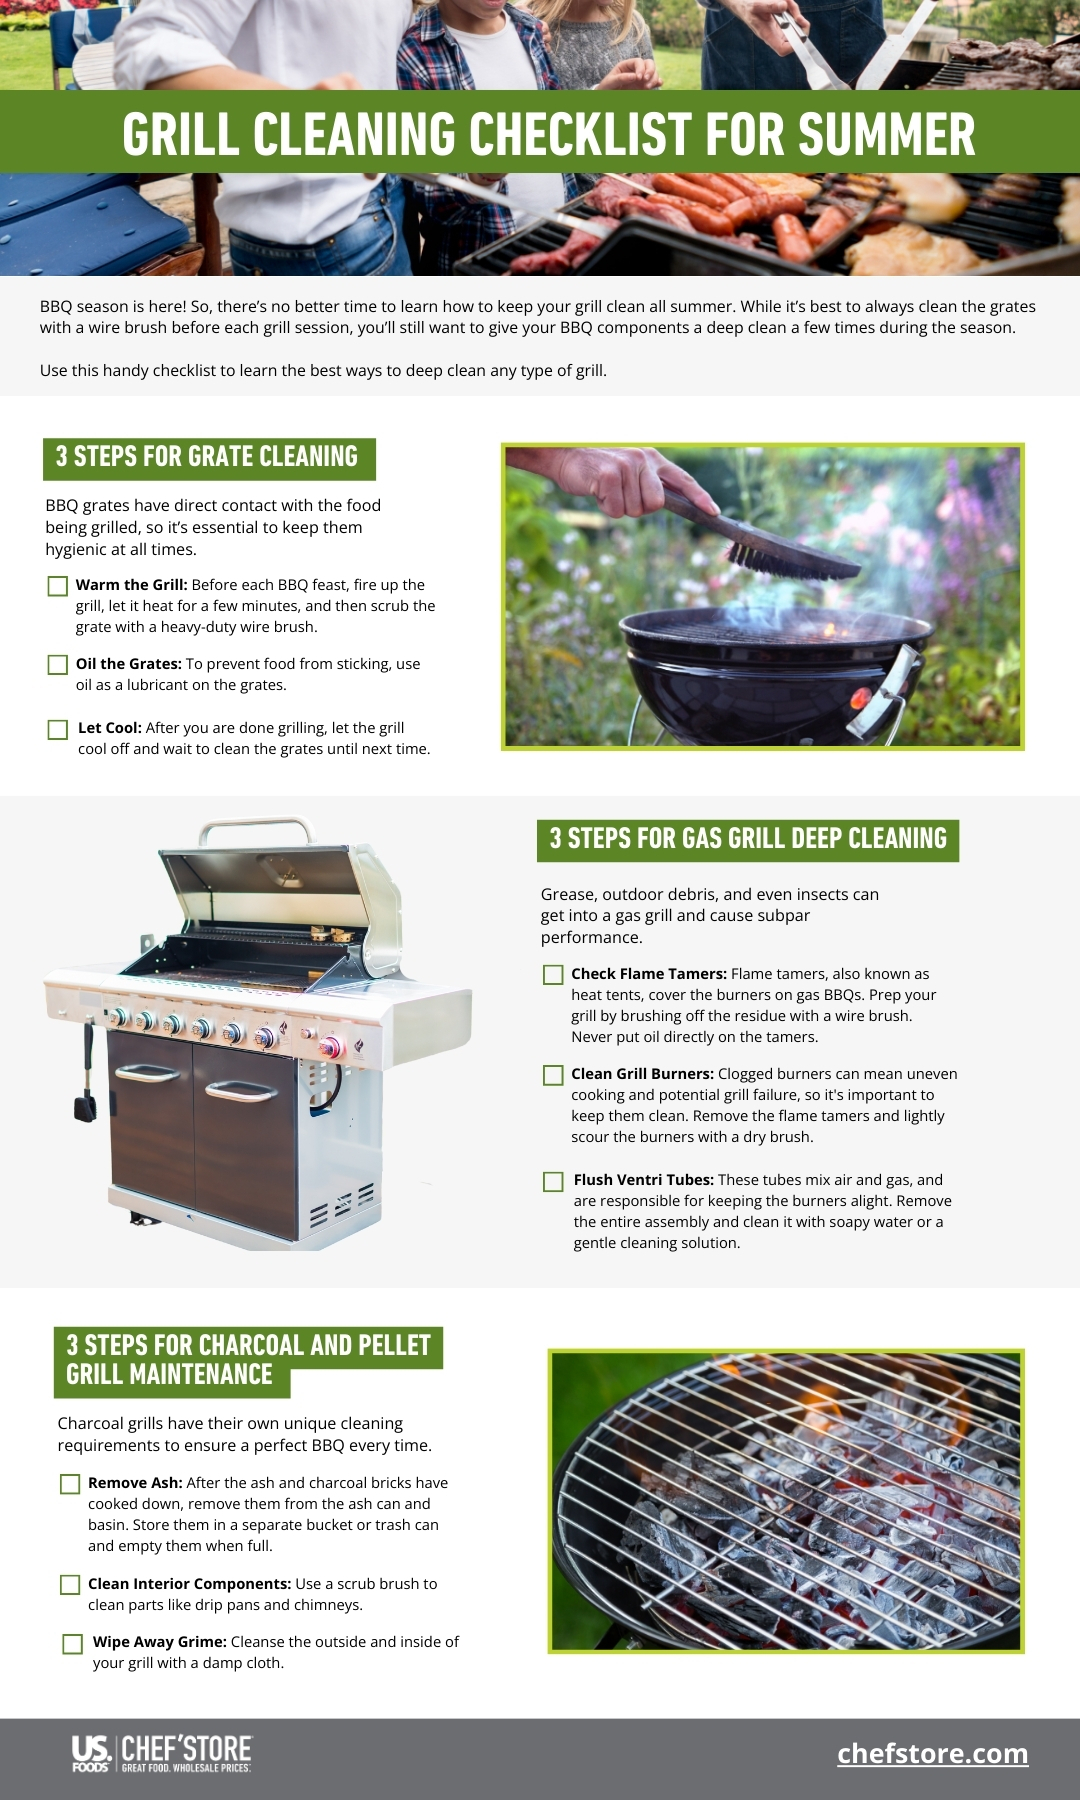 Grill Cleaning Checklist for Summer